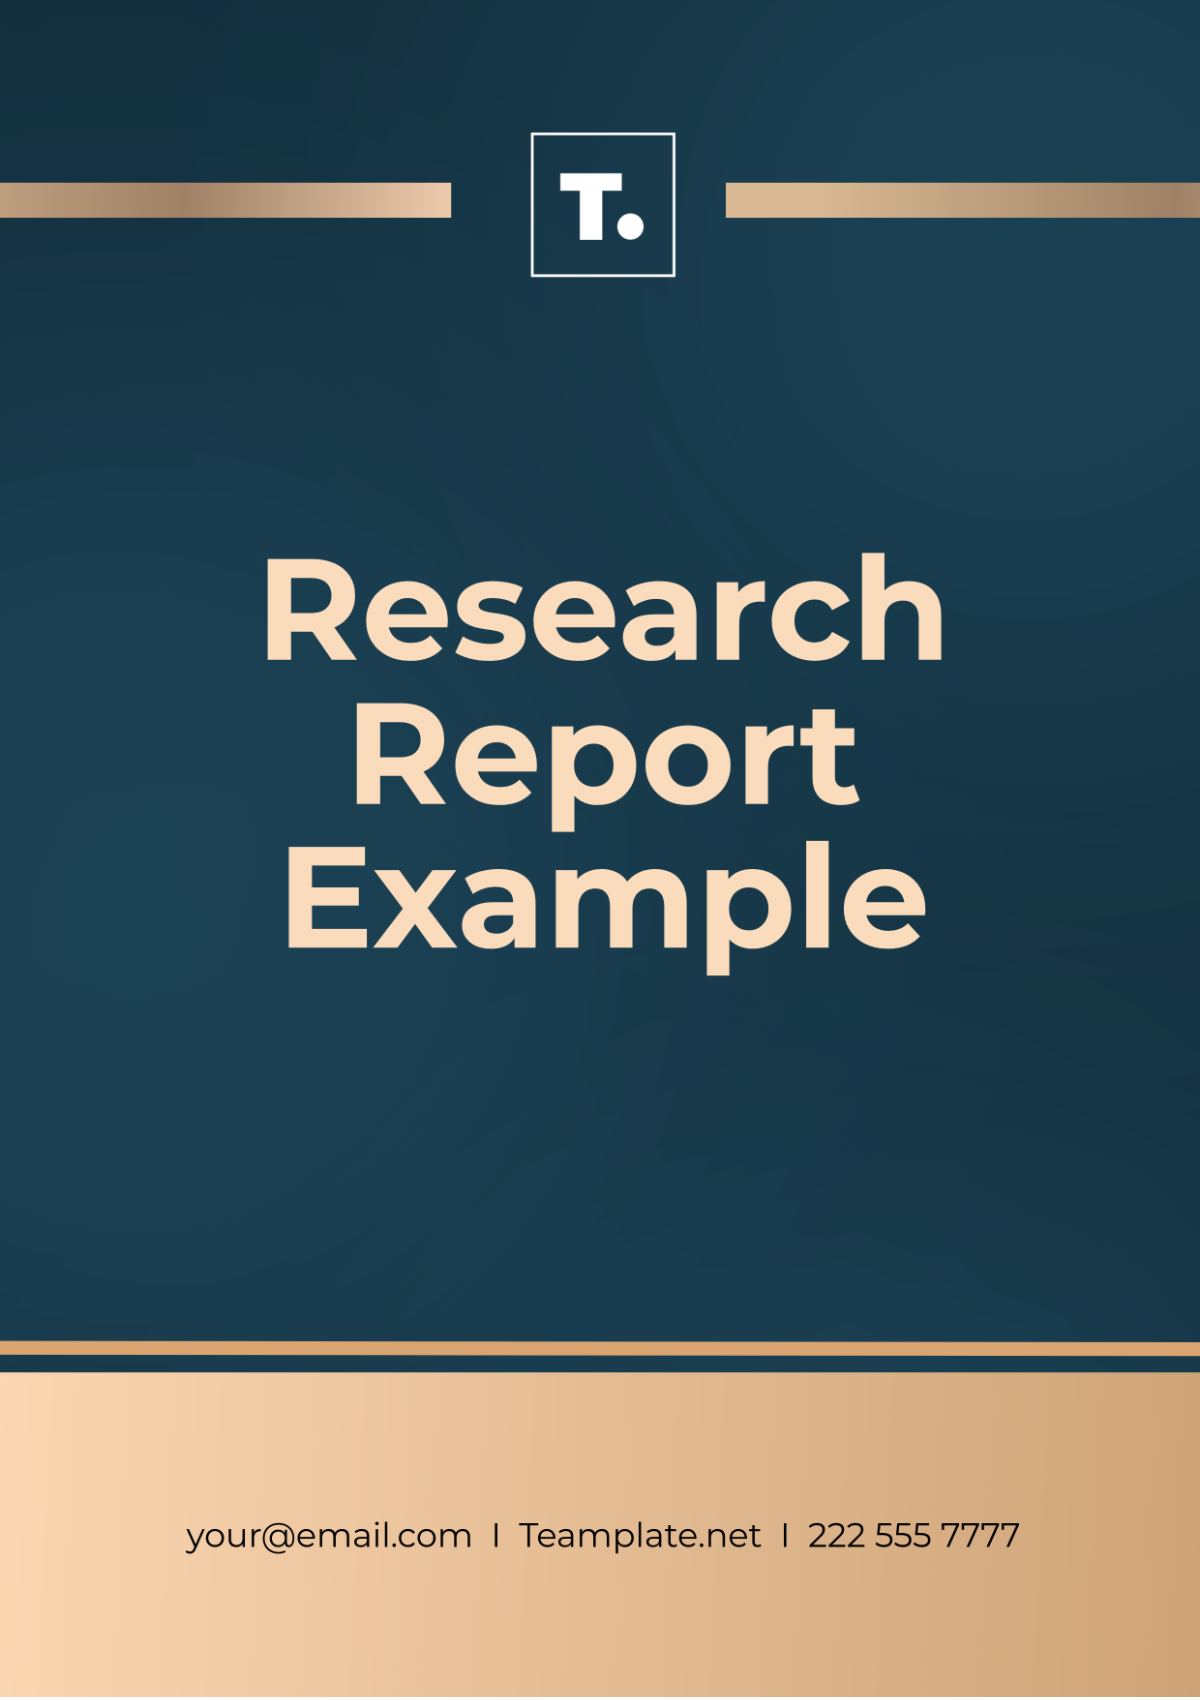 Research Report Example Template